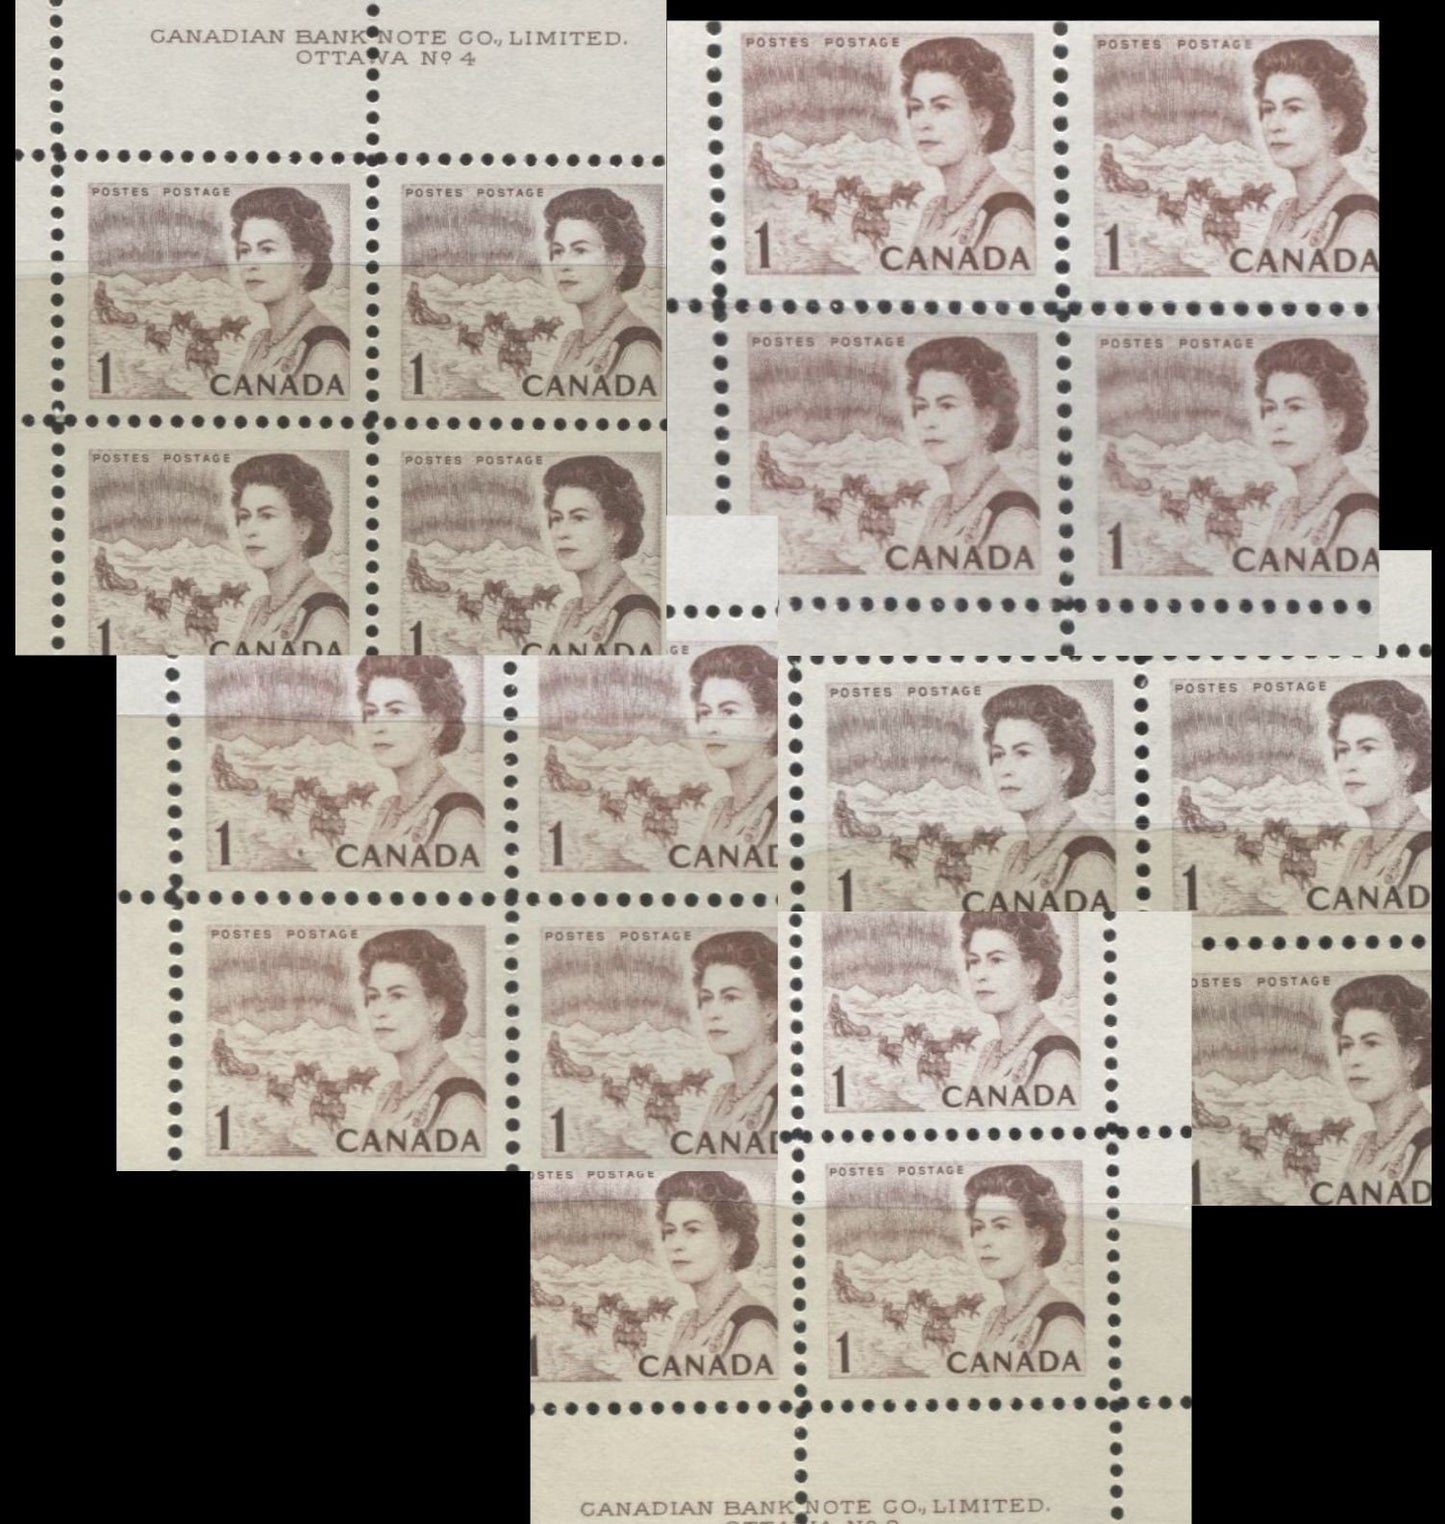 Lot #13 Canada #BK70cvar 1c Purple Brown, 6c Black & 8c Slate, 1967-1973 Centennial Issue, A VFNH Complete Booklet, Showing the Elusive Short Print on 2/4, OP-4 Tagging